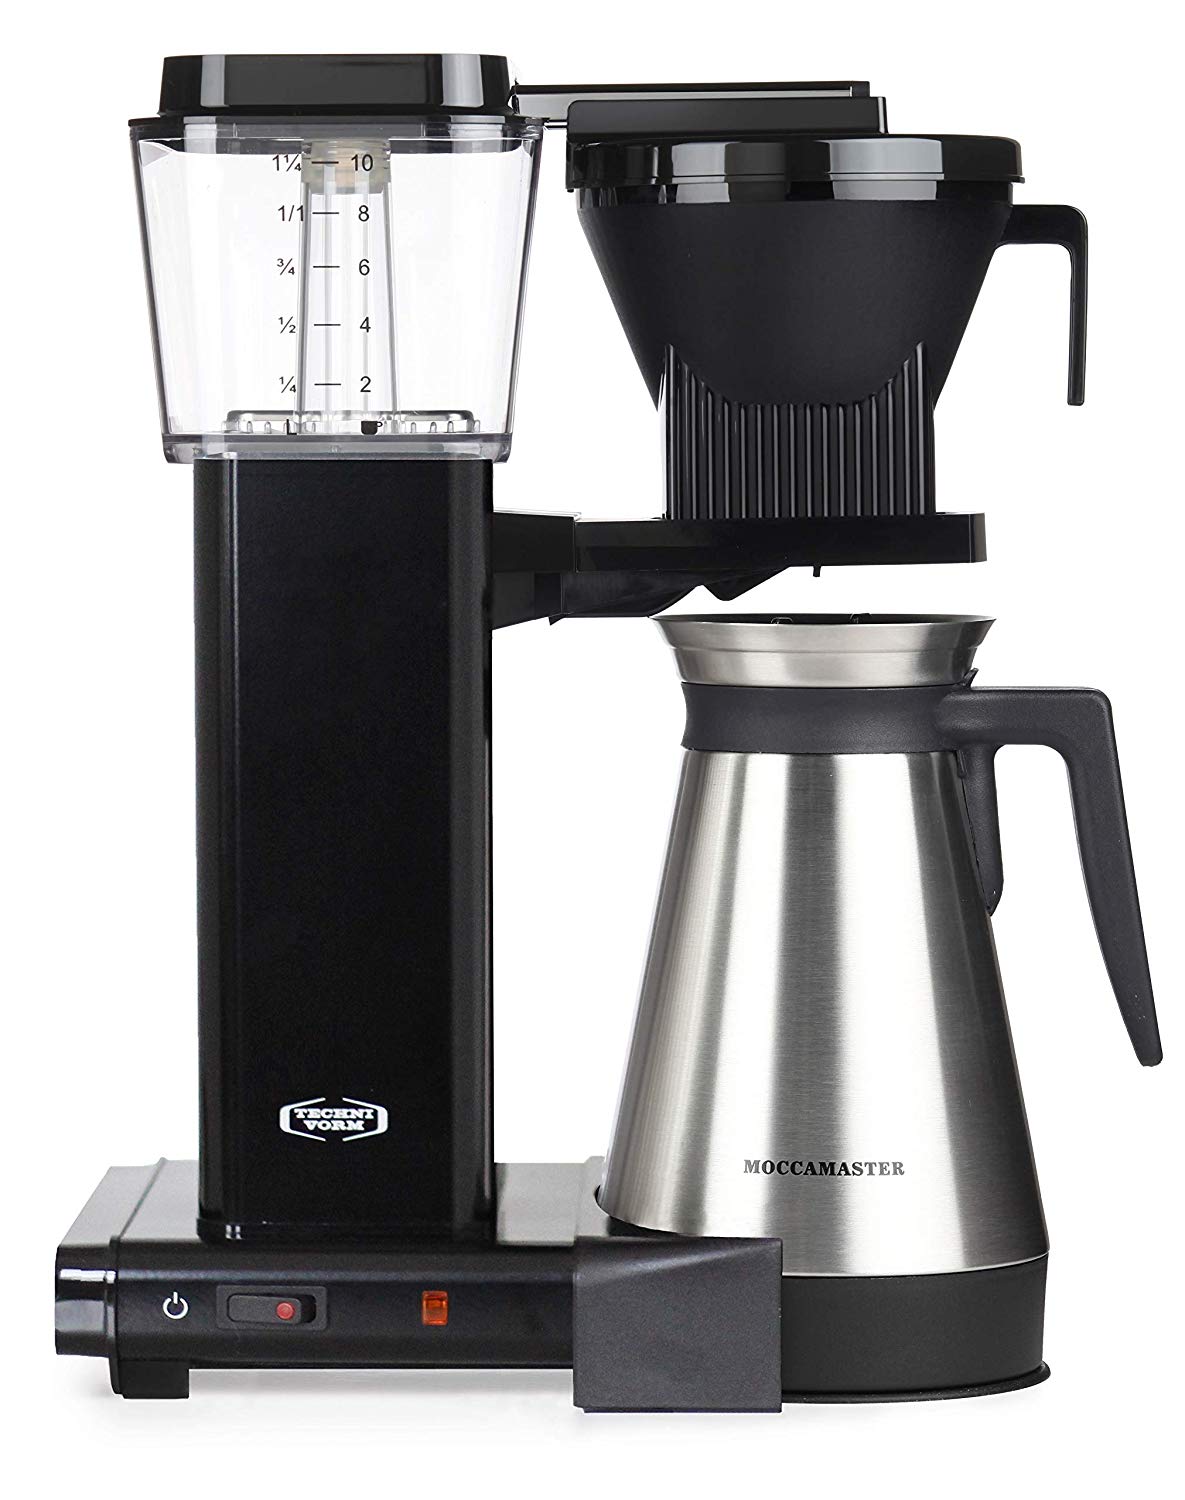 Moccamaster 79323 Coffee Maker, Transparent Water Tank with Clear Indicator